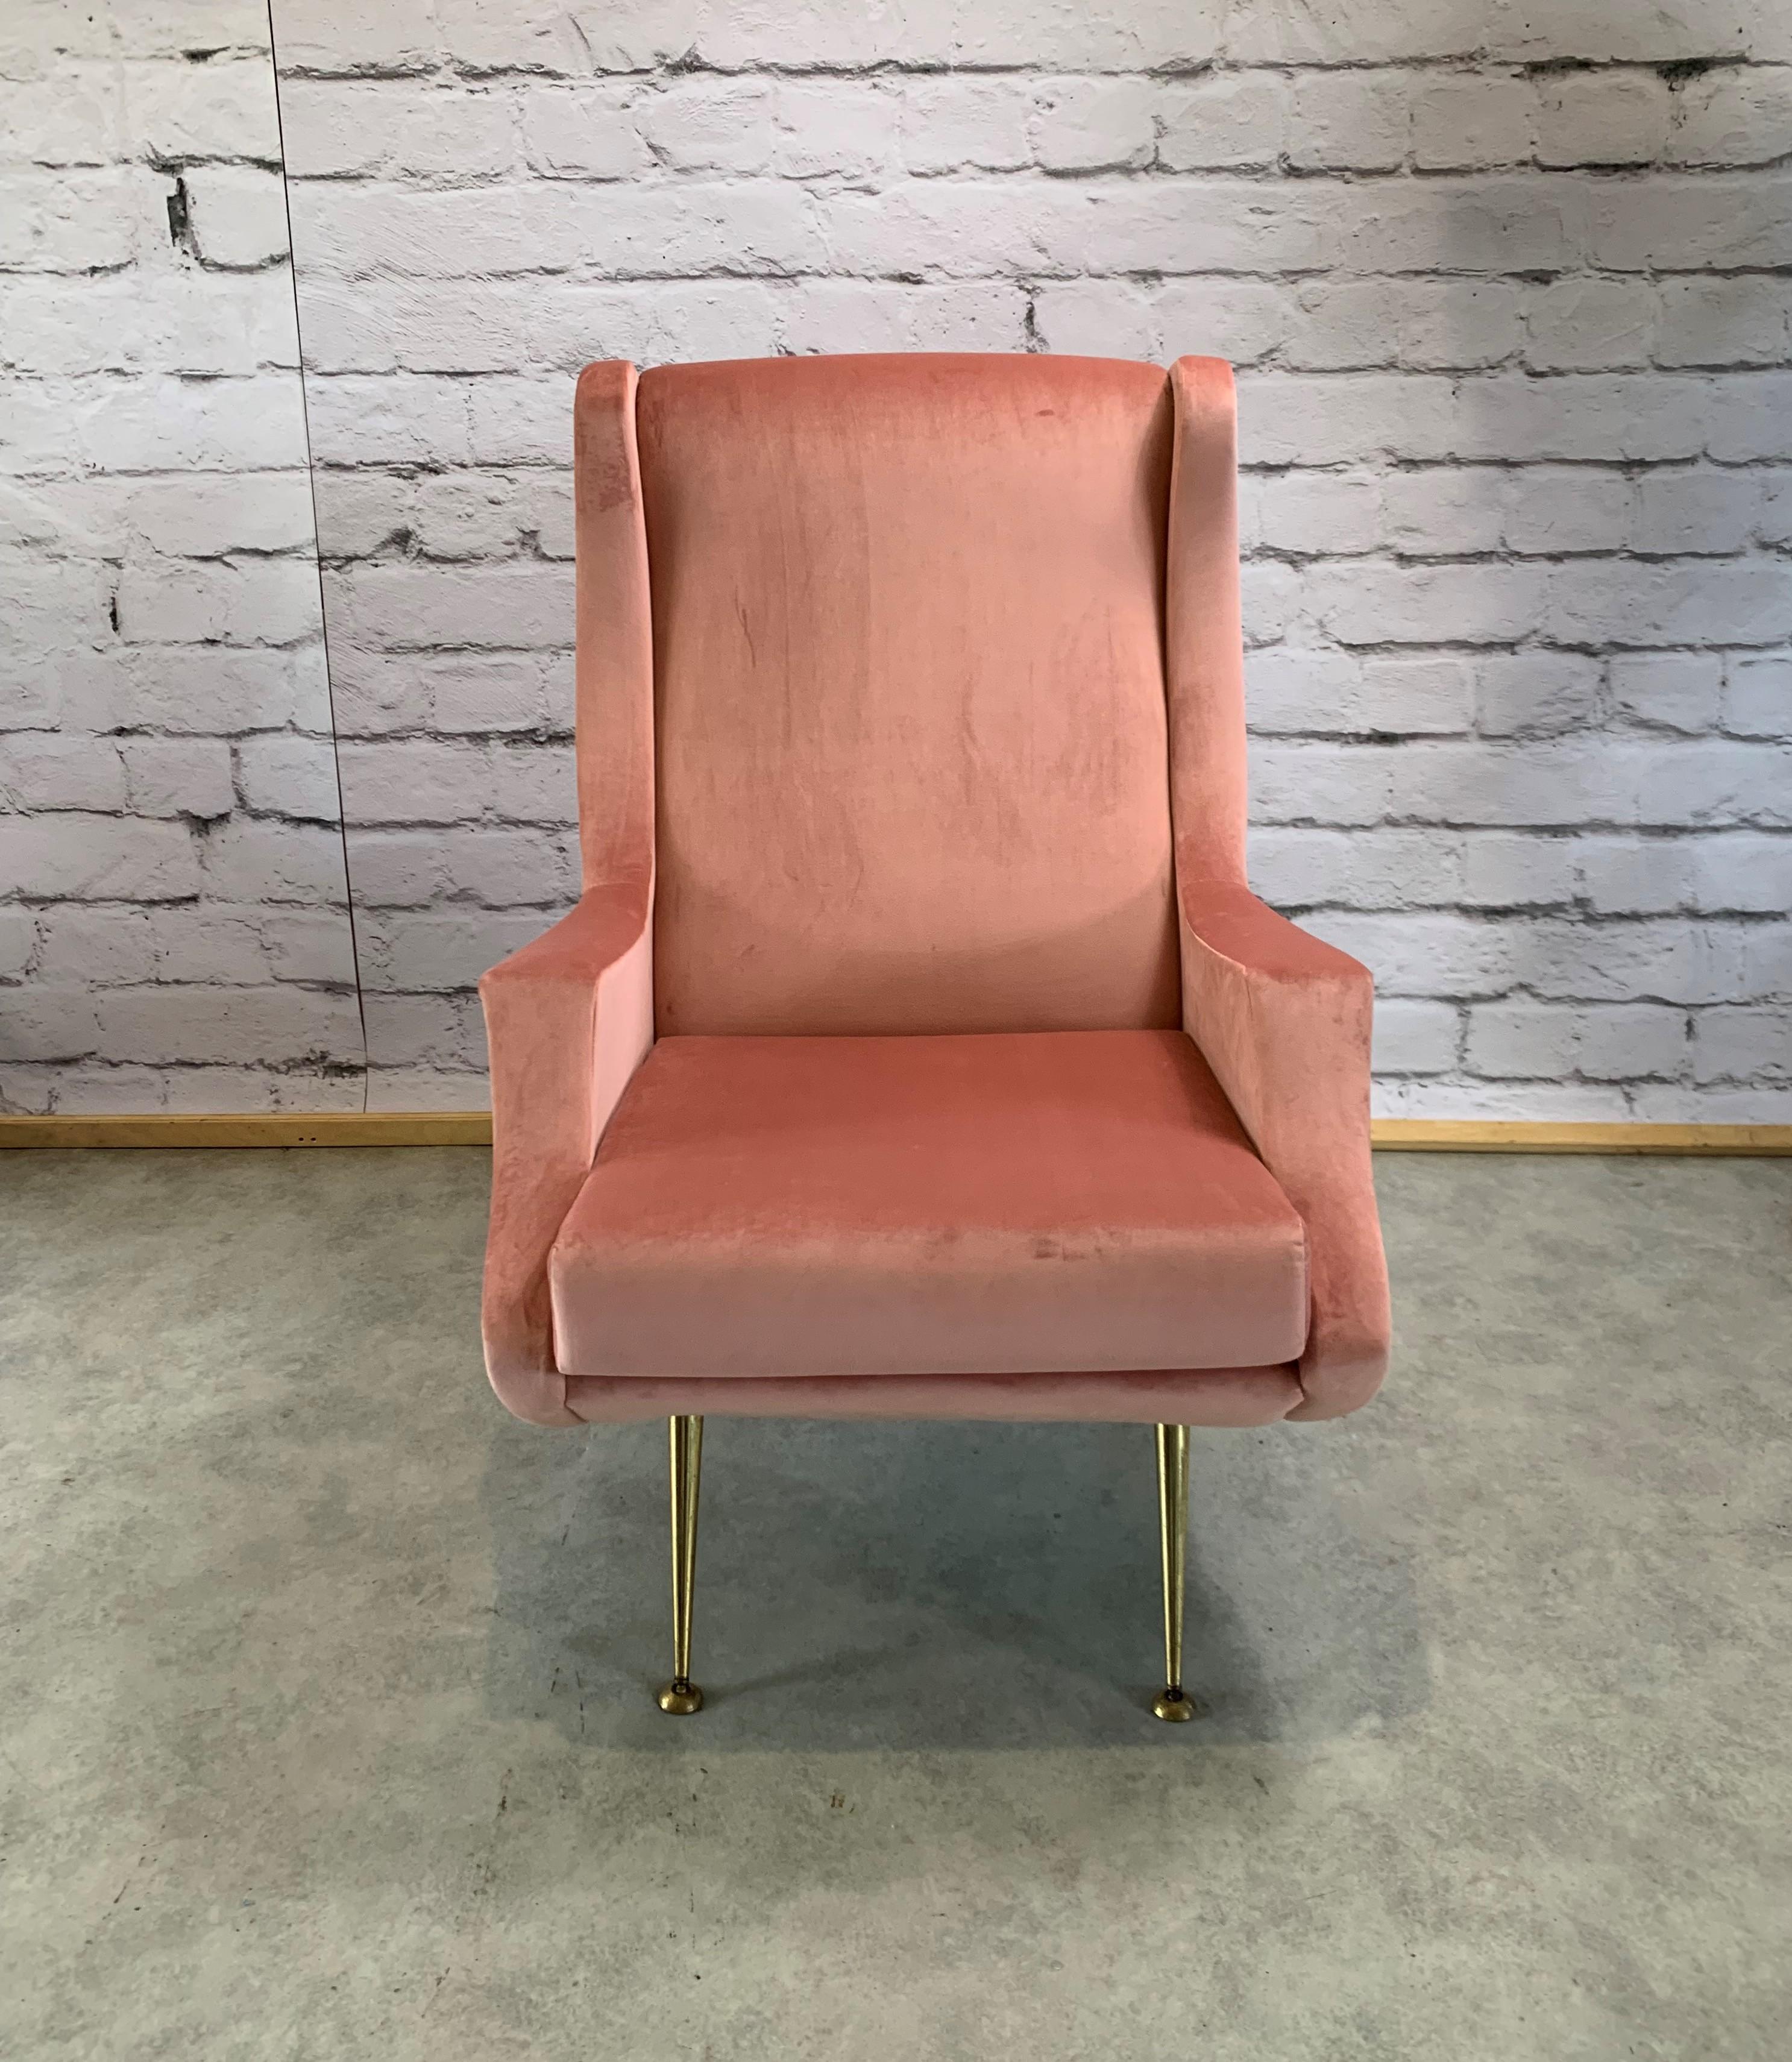 Italian vintage armchair in the style of Marco Zanuso. It is reupholstered with beautiful shiny light pink velvet. It has very stylish original brass legs. Great curved shape. It will fit vintage, regency and international style interiors.